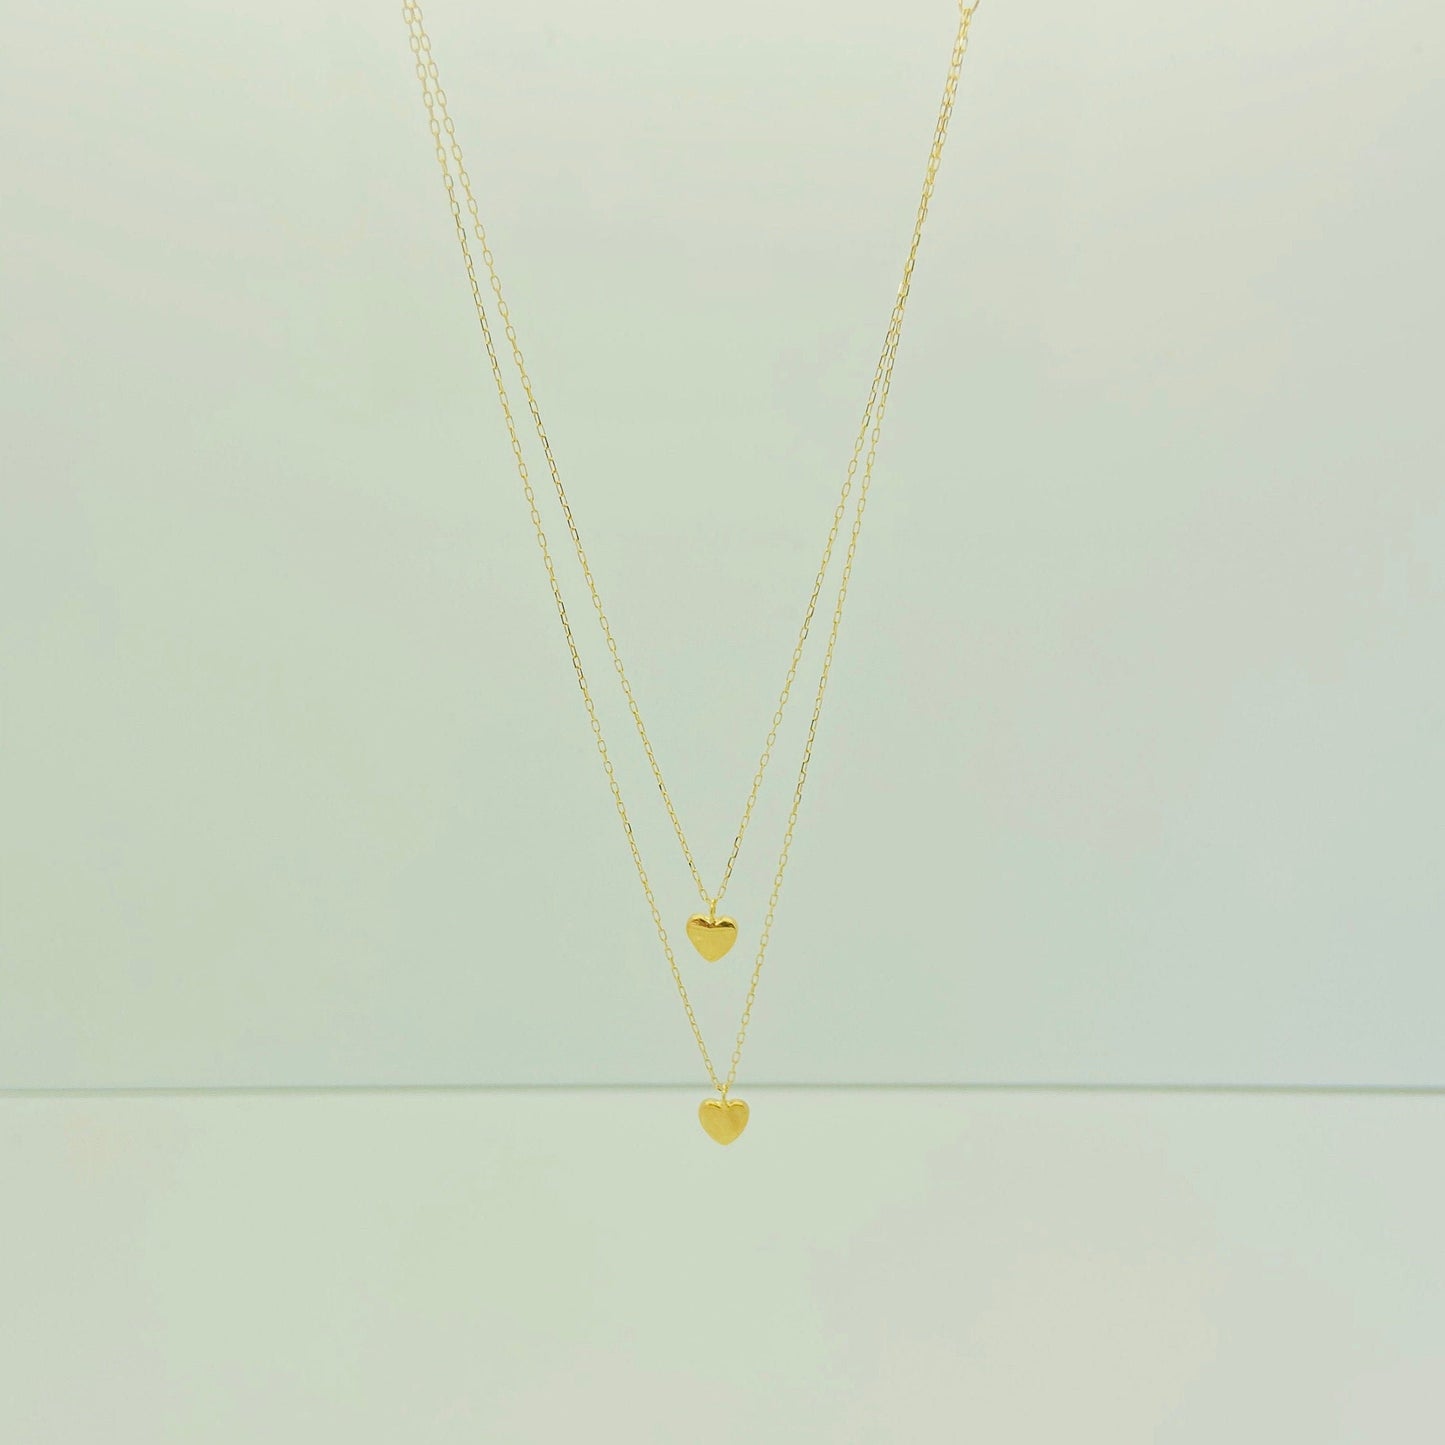 Yellow Gold 2 Layer Lariat Heart Dangle Pendant Chain Necklace